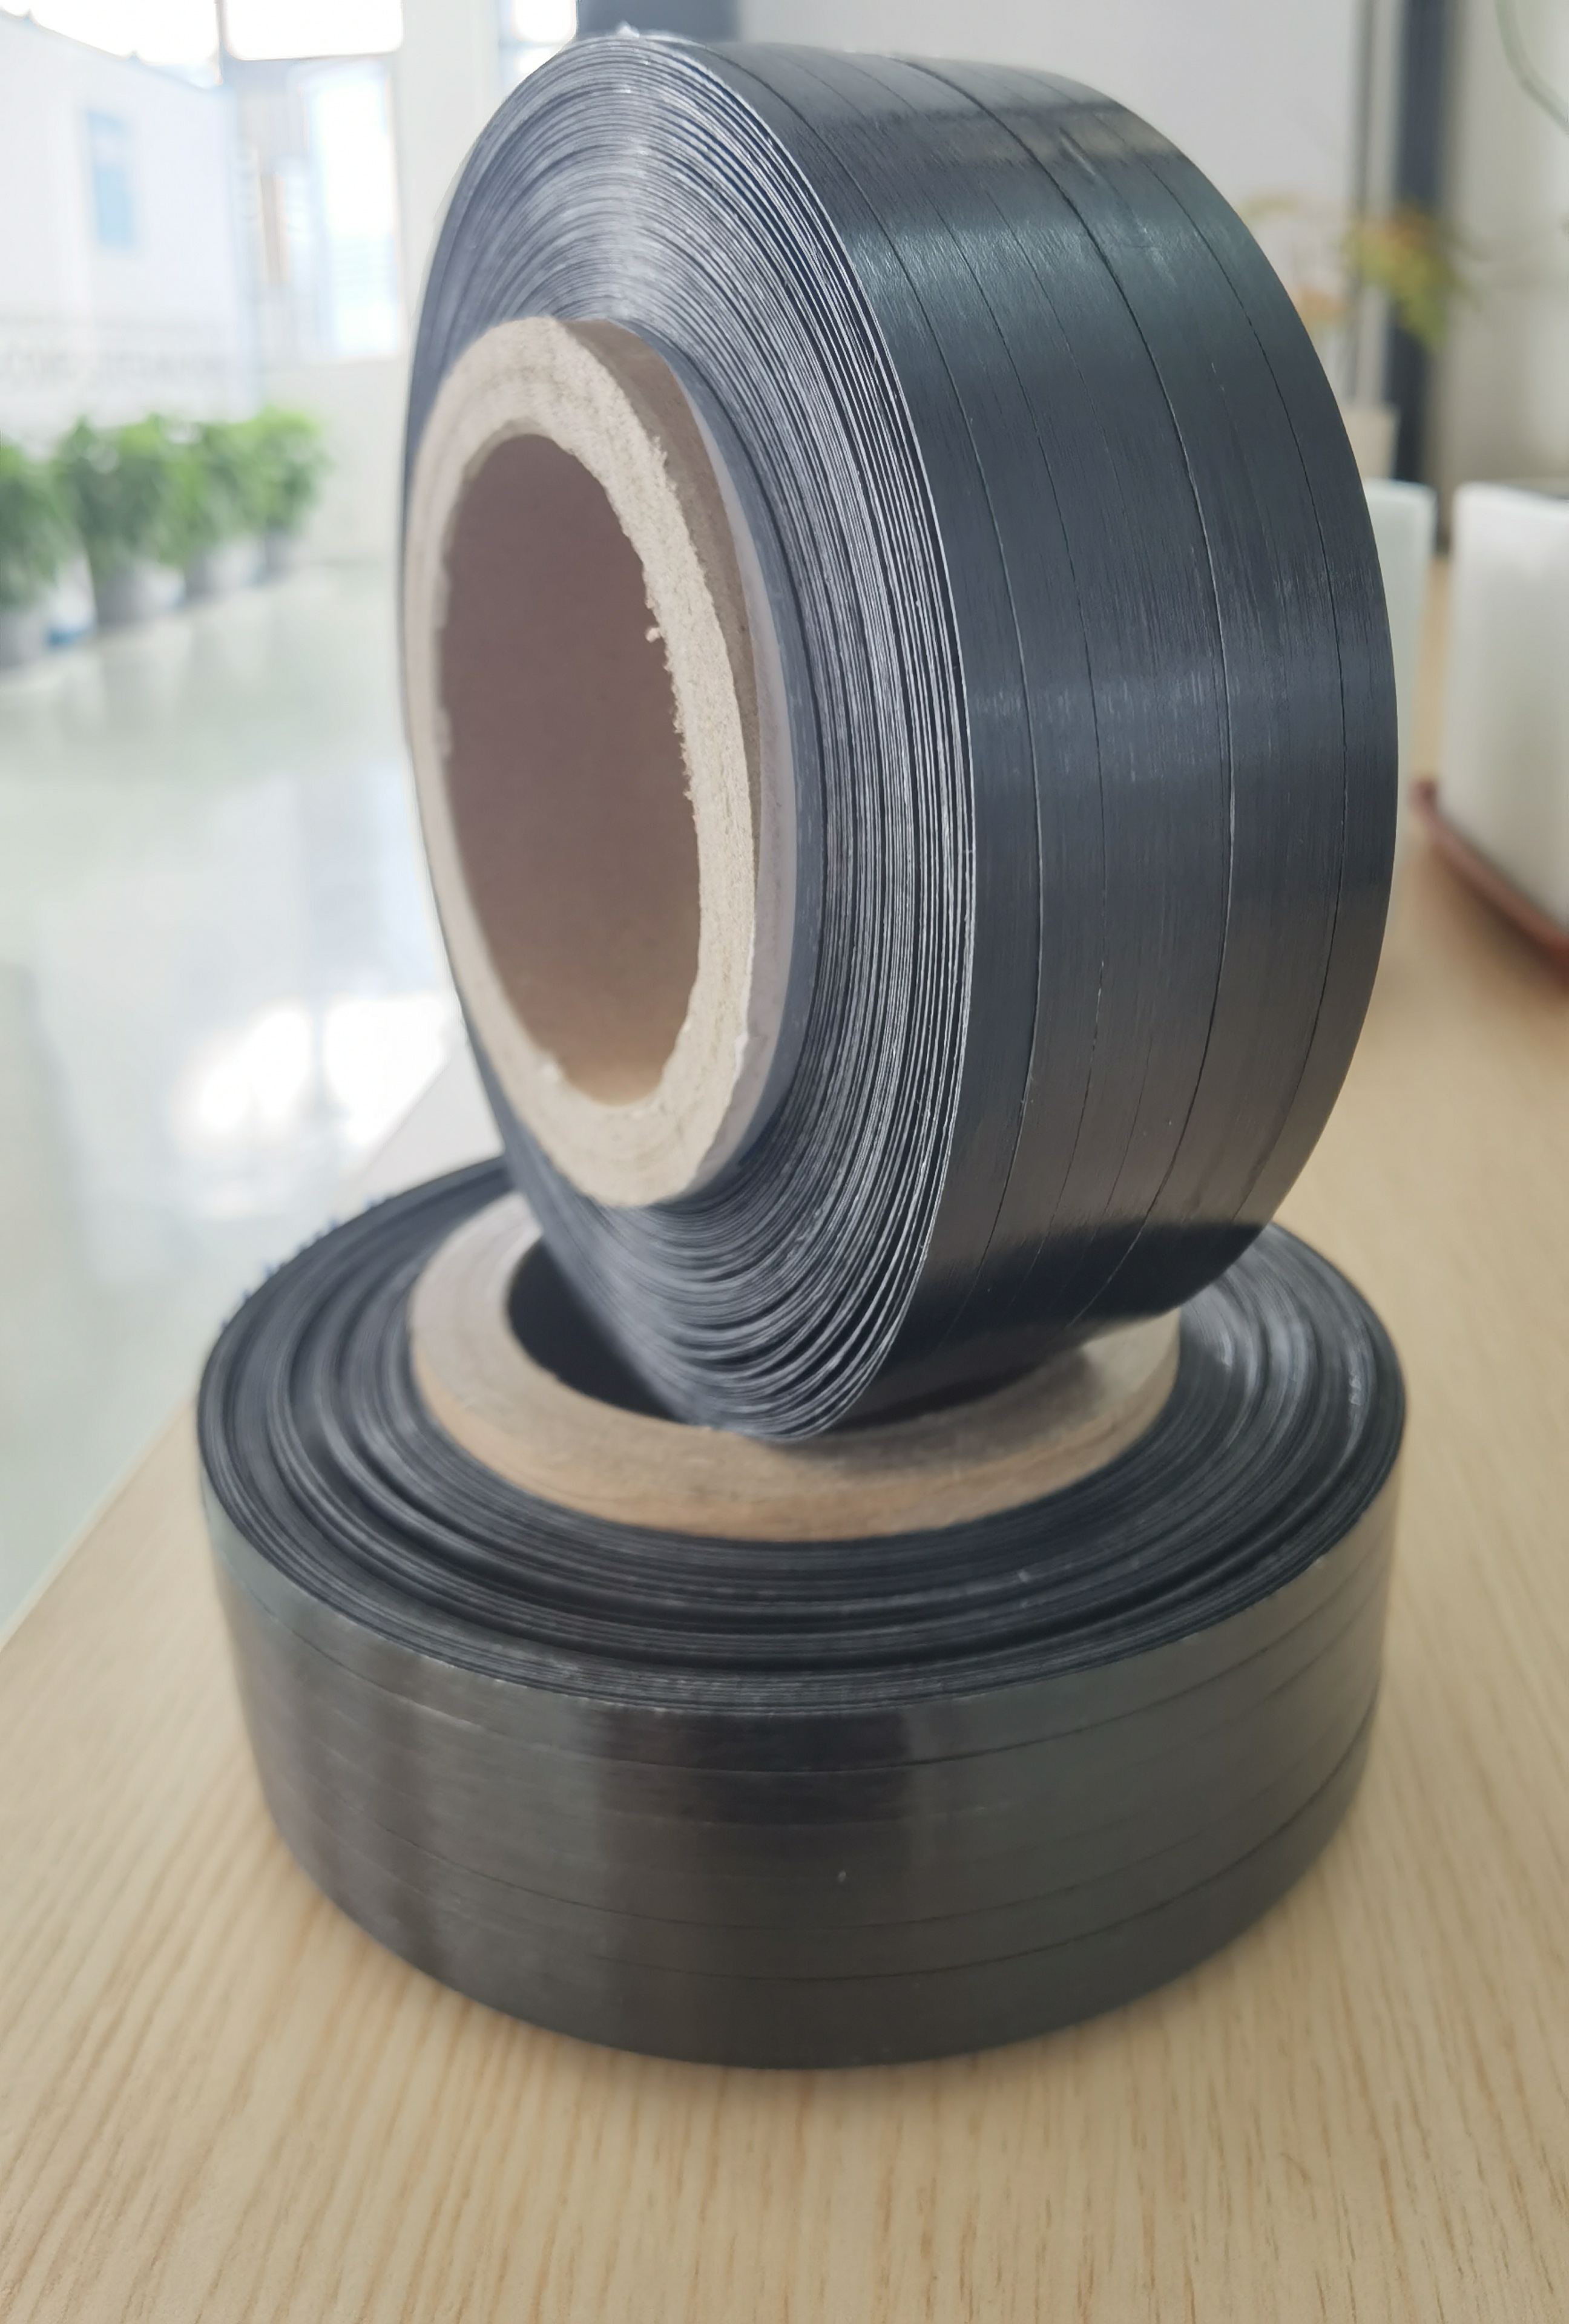 Three Trends in The Application of Thermoplastic Carbon Fiber